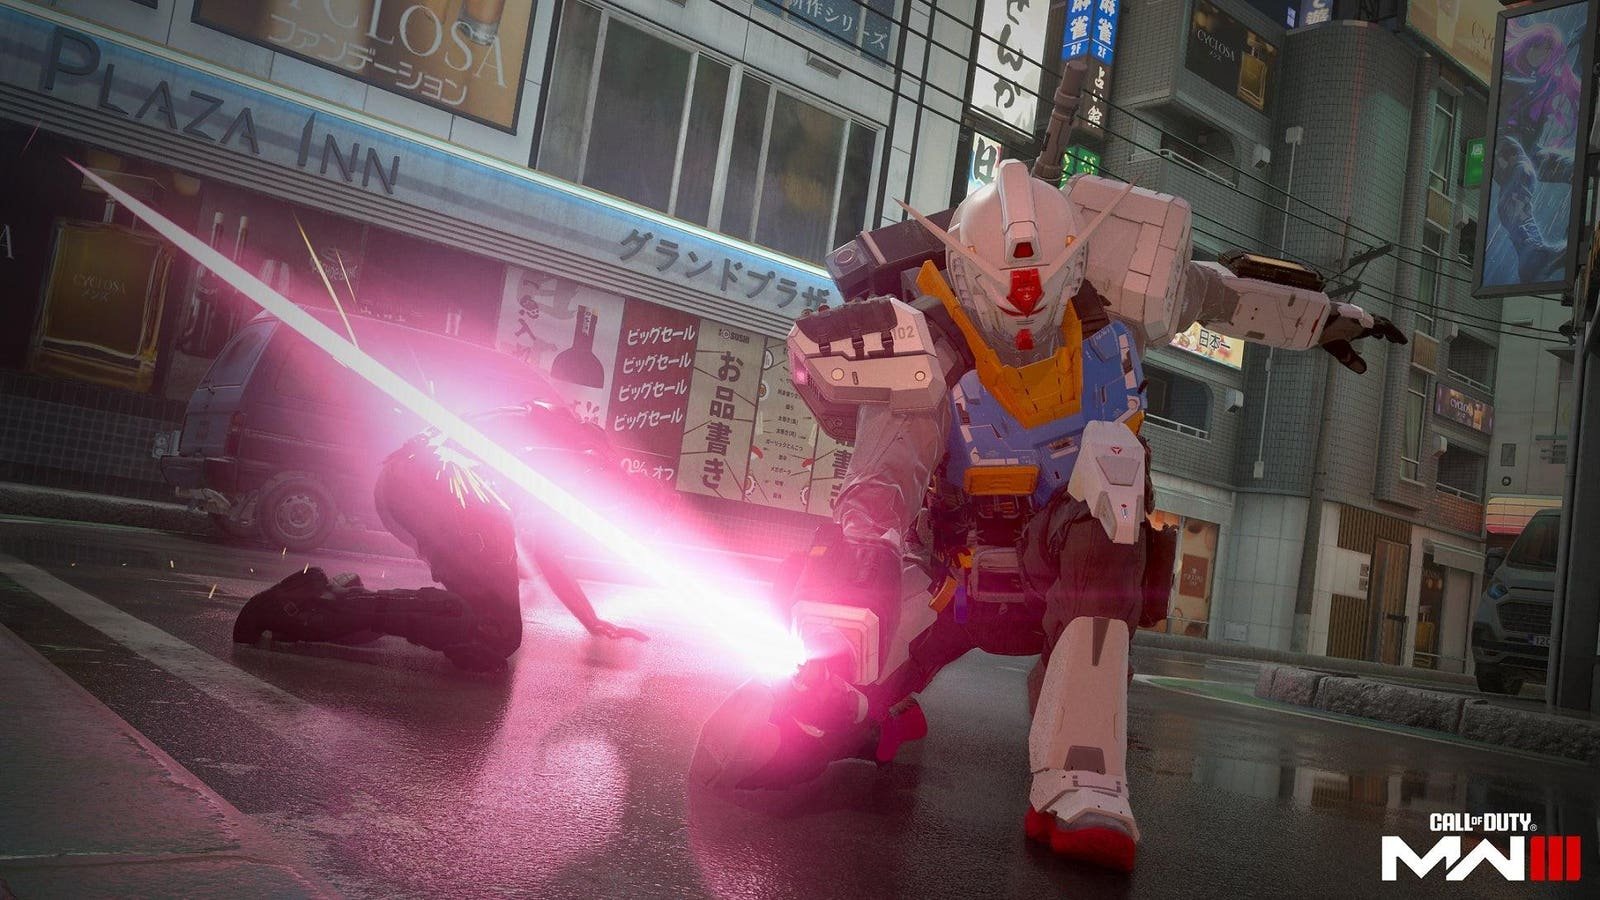 The ‘Gundam’ Crossover In ‘Call Of Duty’ Has You Cosplay As Mecha